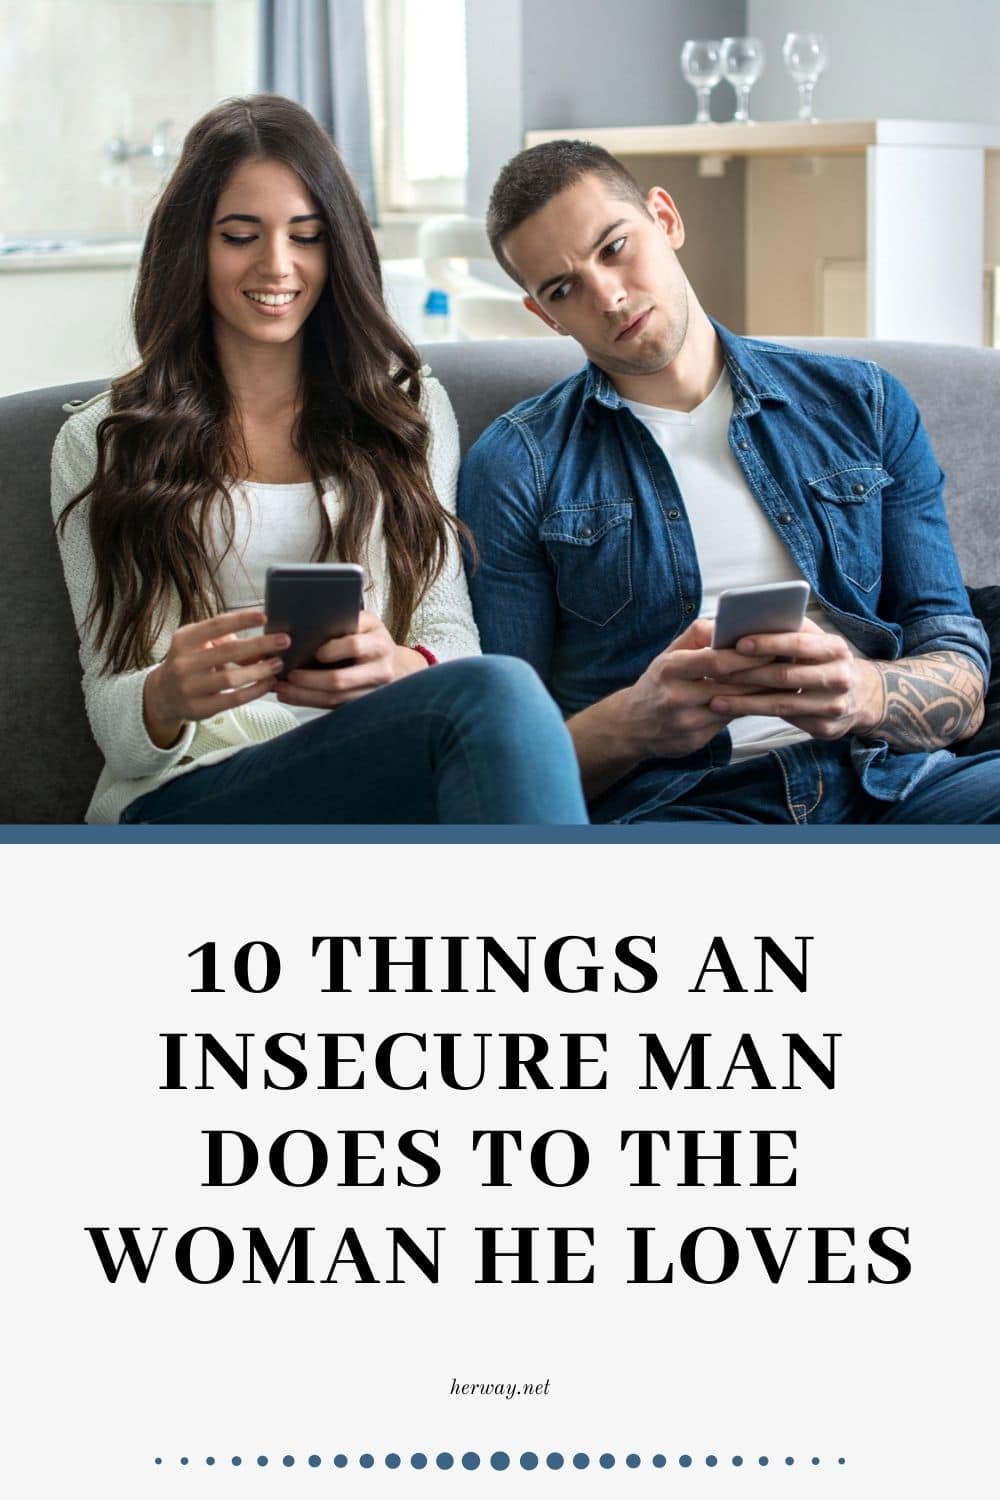 10 Things An Insecure Man Does To The Woman He Loves